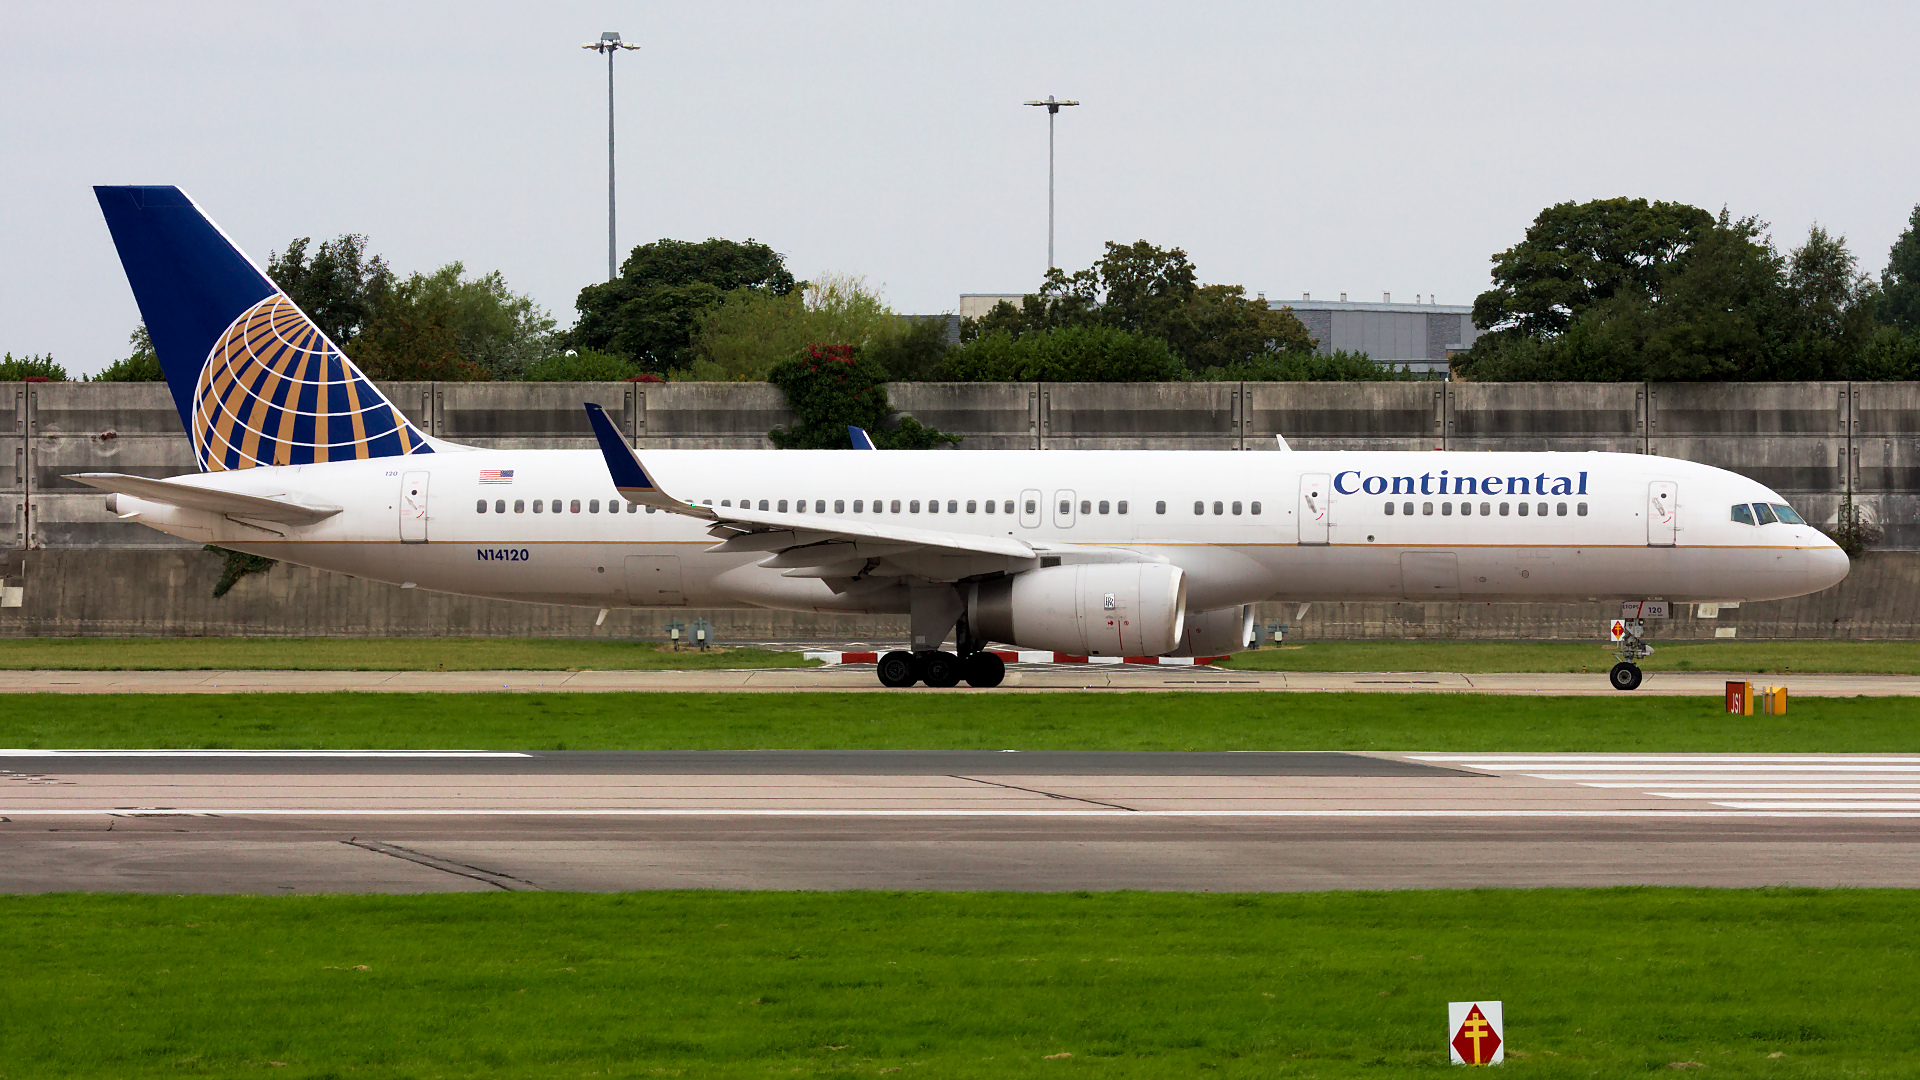 N14120 ✈ Continental Airlines Boeing 757-224 @ Manchester